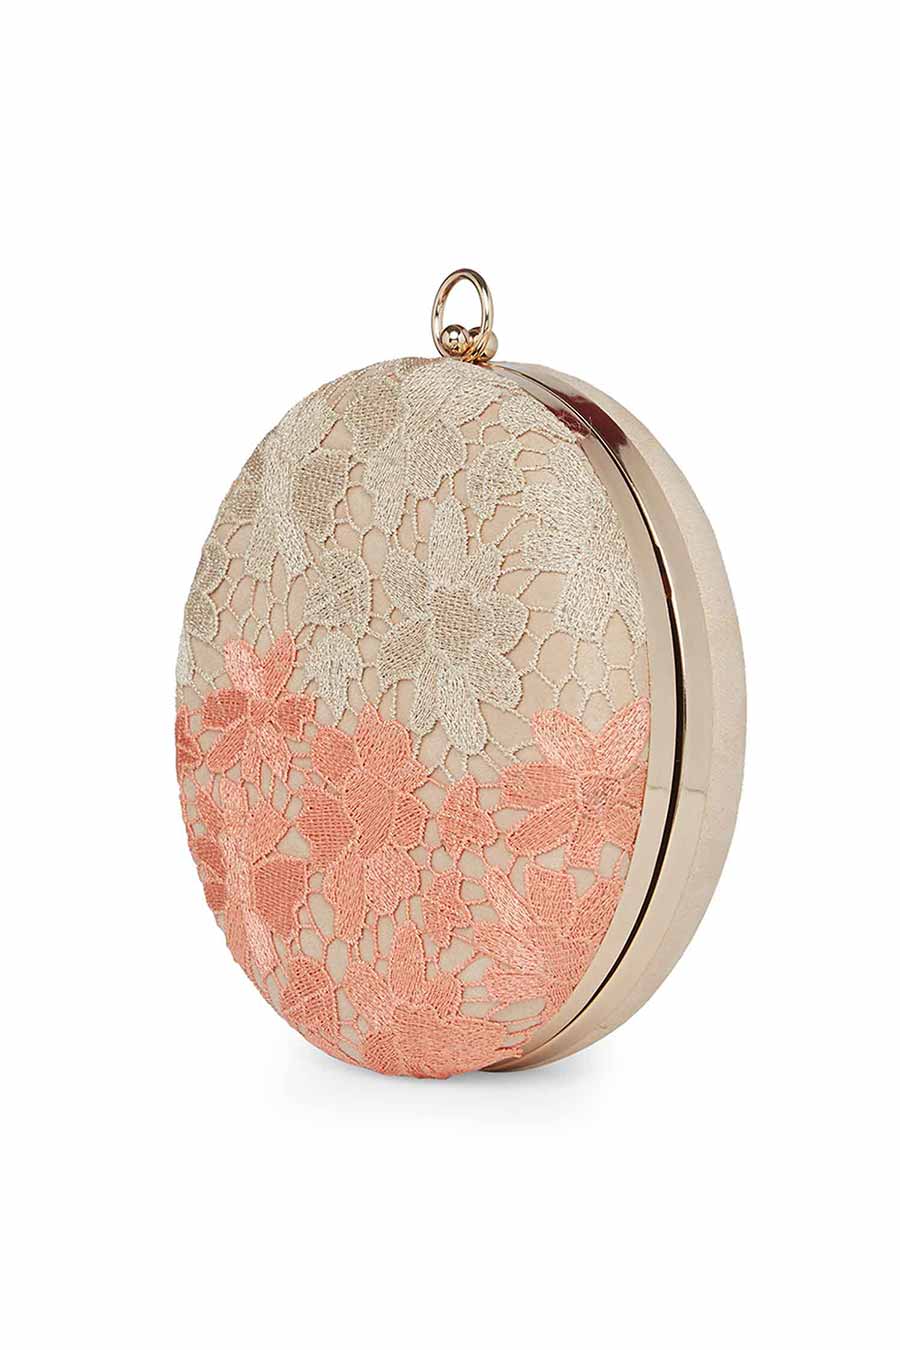 Peach And Gold Lace Clutch